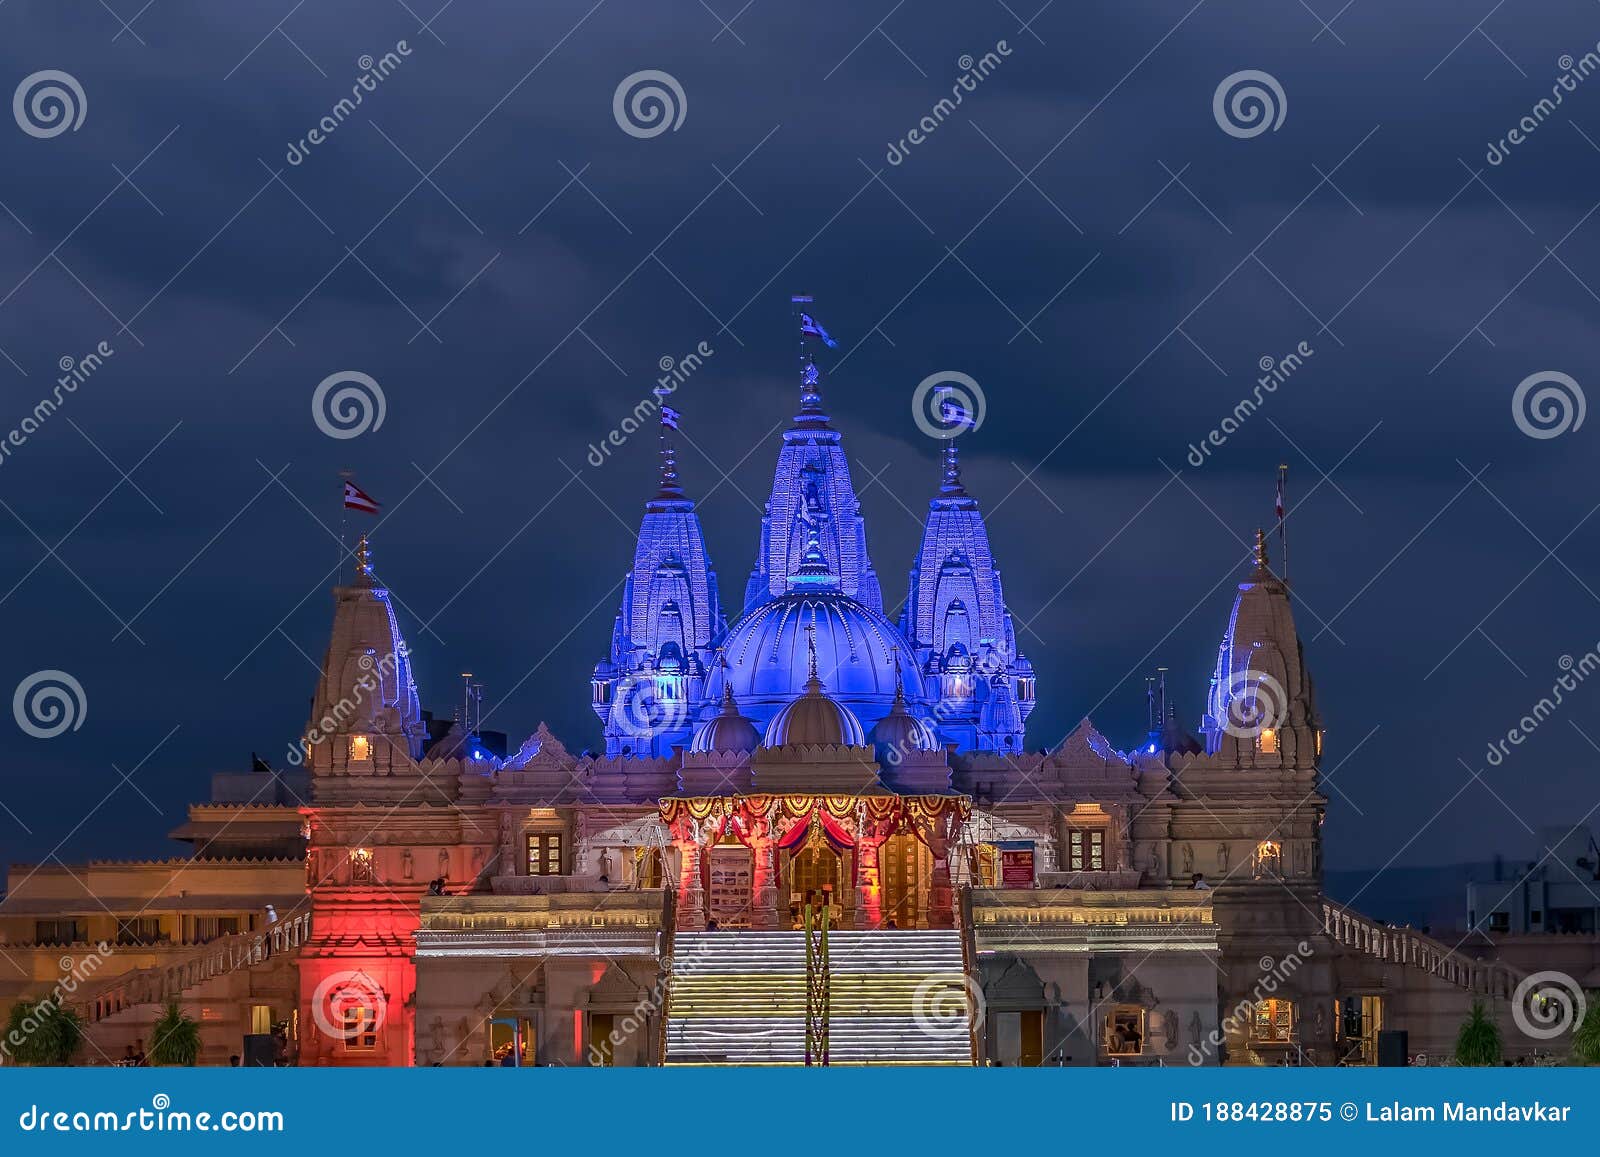 night lighted image of shree swaminarayan temple with monsoon clouds background., ambe gaon, pune .